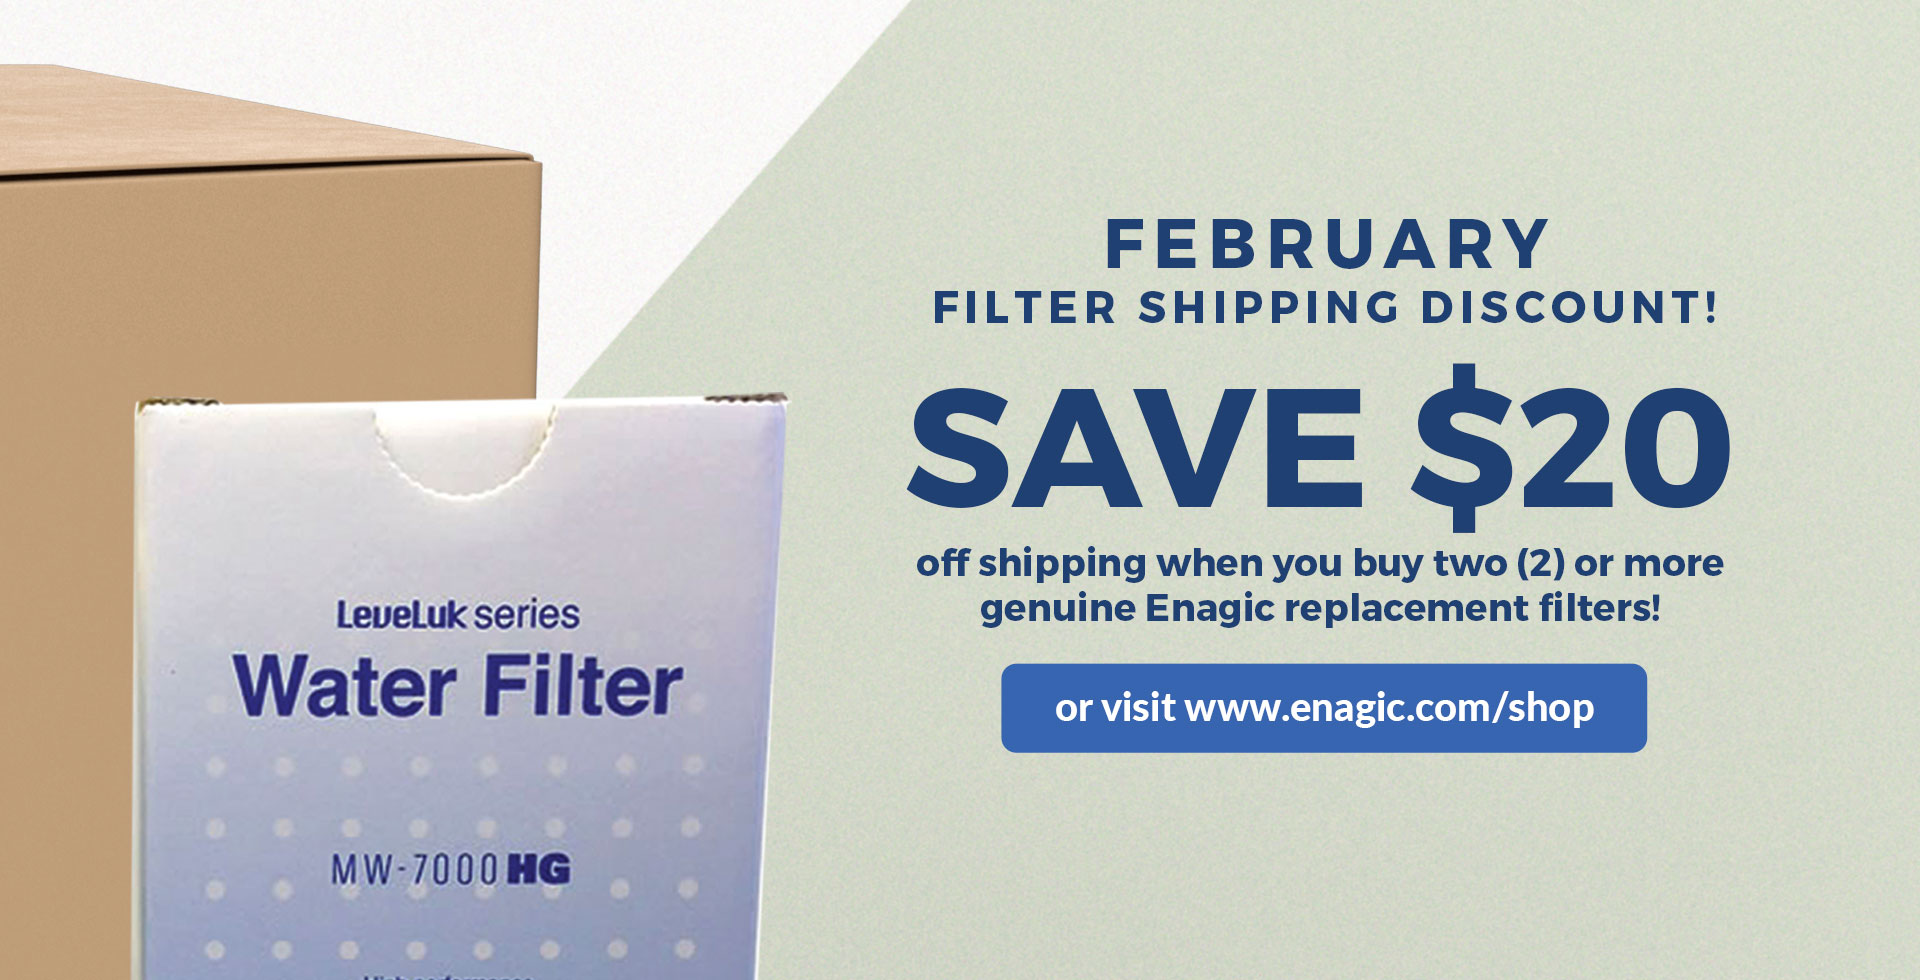 Order your filters today!